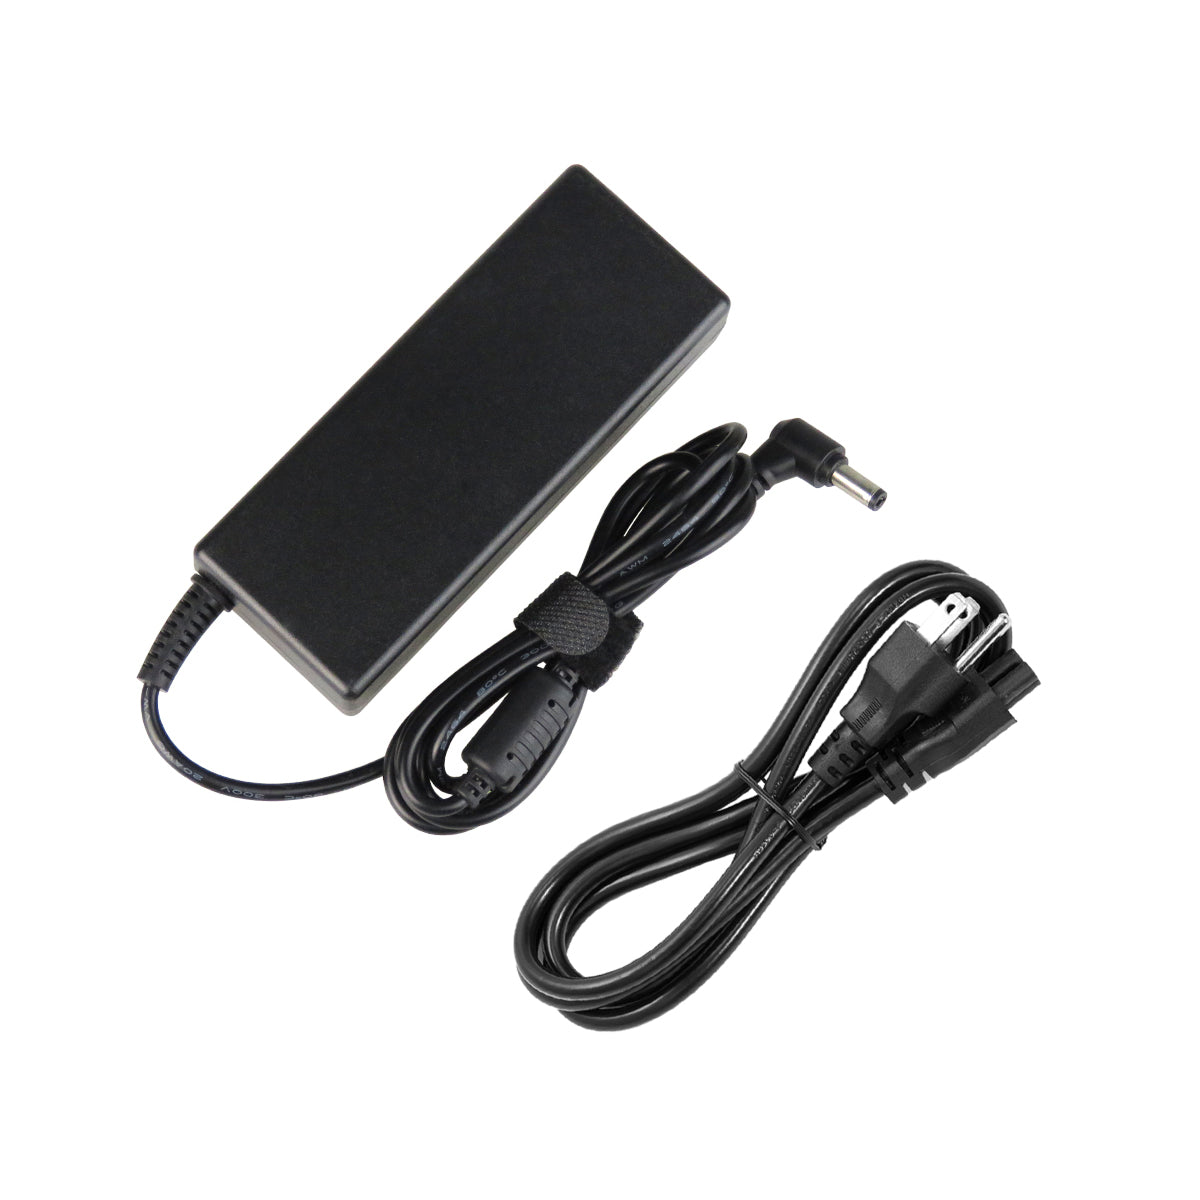 AC Adapter Charger for Toshiba Satellite m650 Notebook.